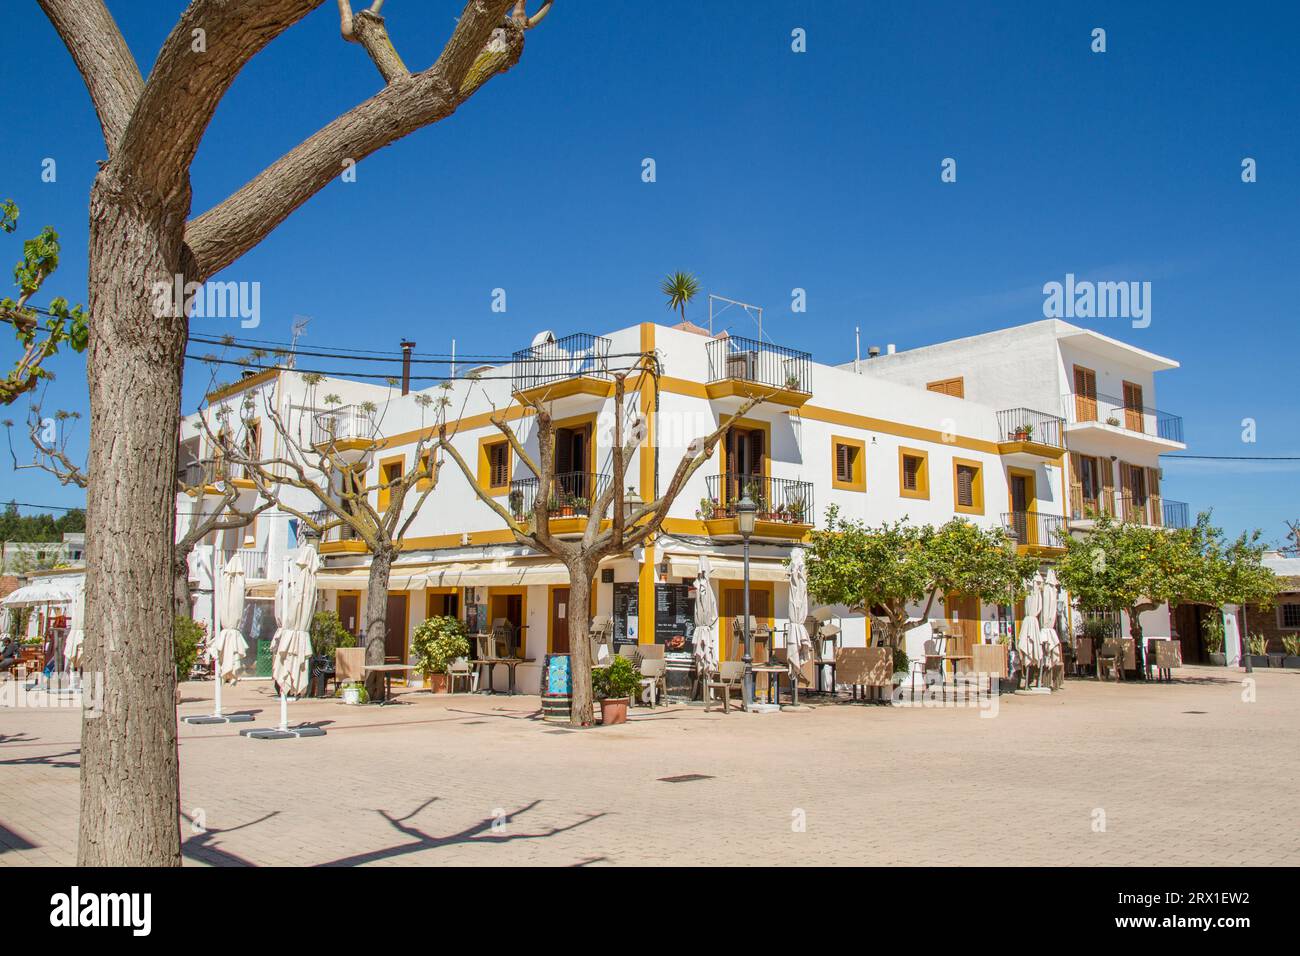 Pitoresque village Santa Gertrudis, famous place for a daytrip at Ibiza island, Balearic islands, Spain, Europe Stock Photo